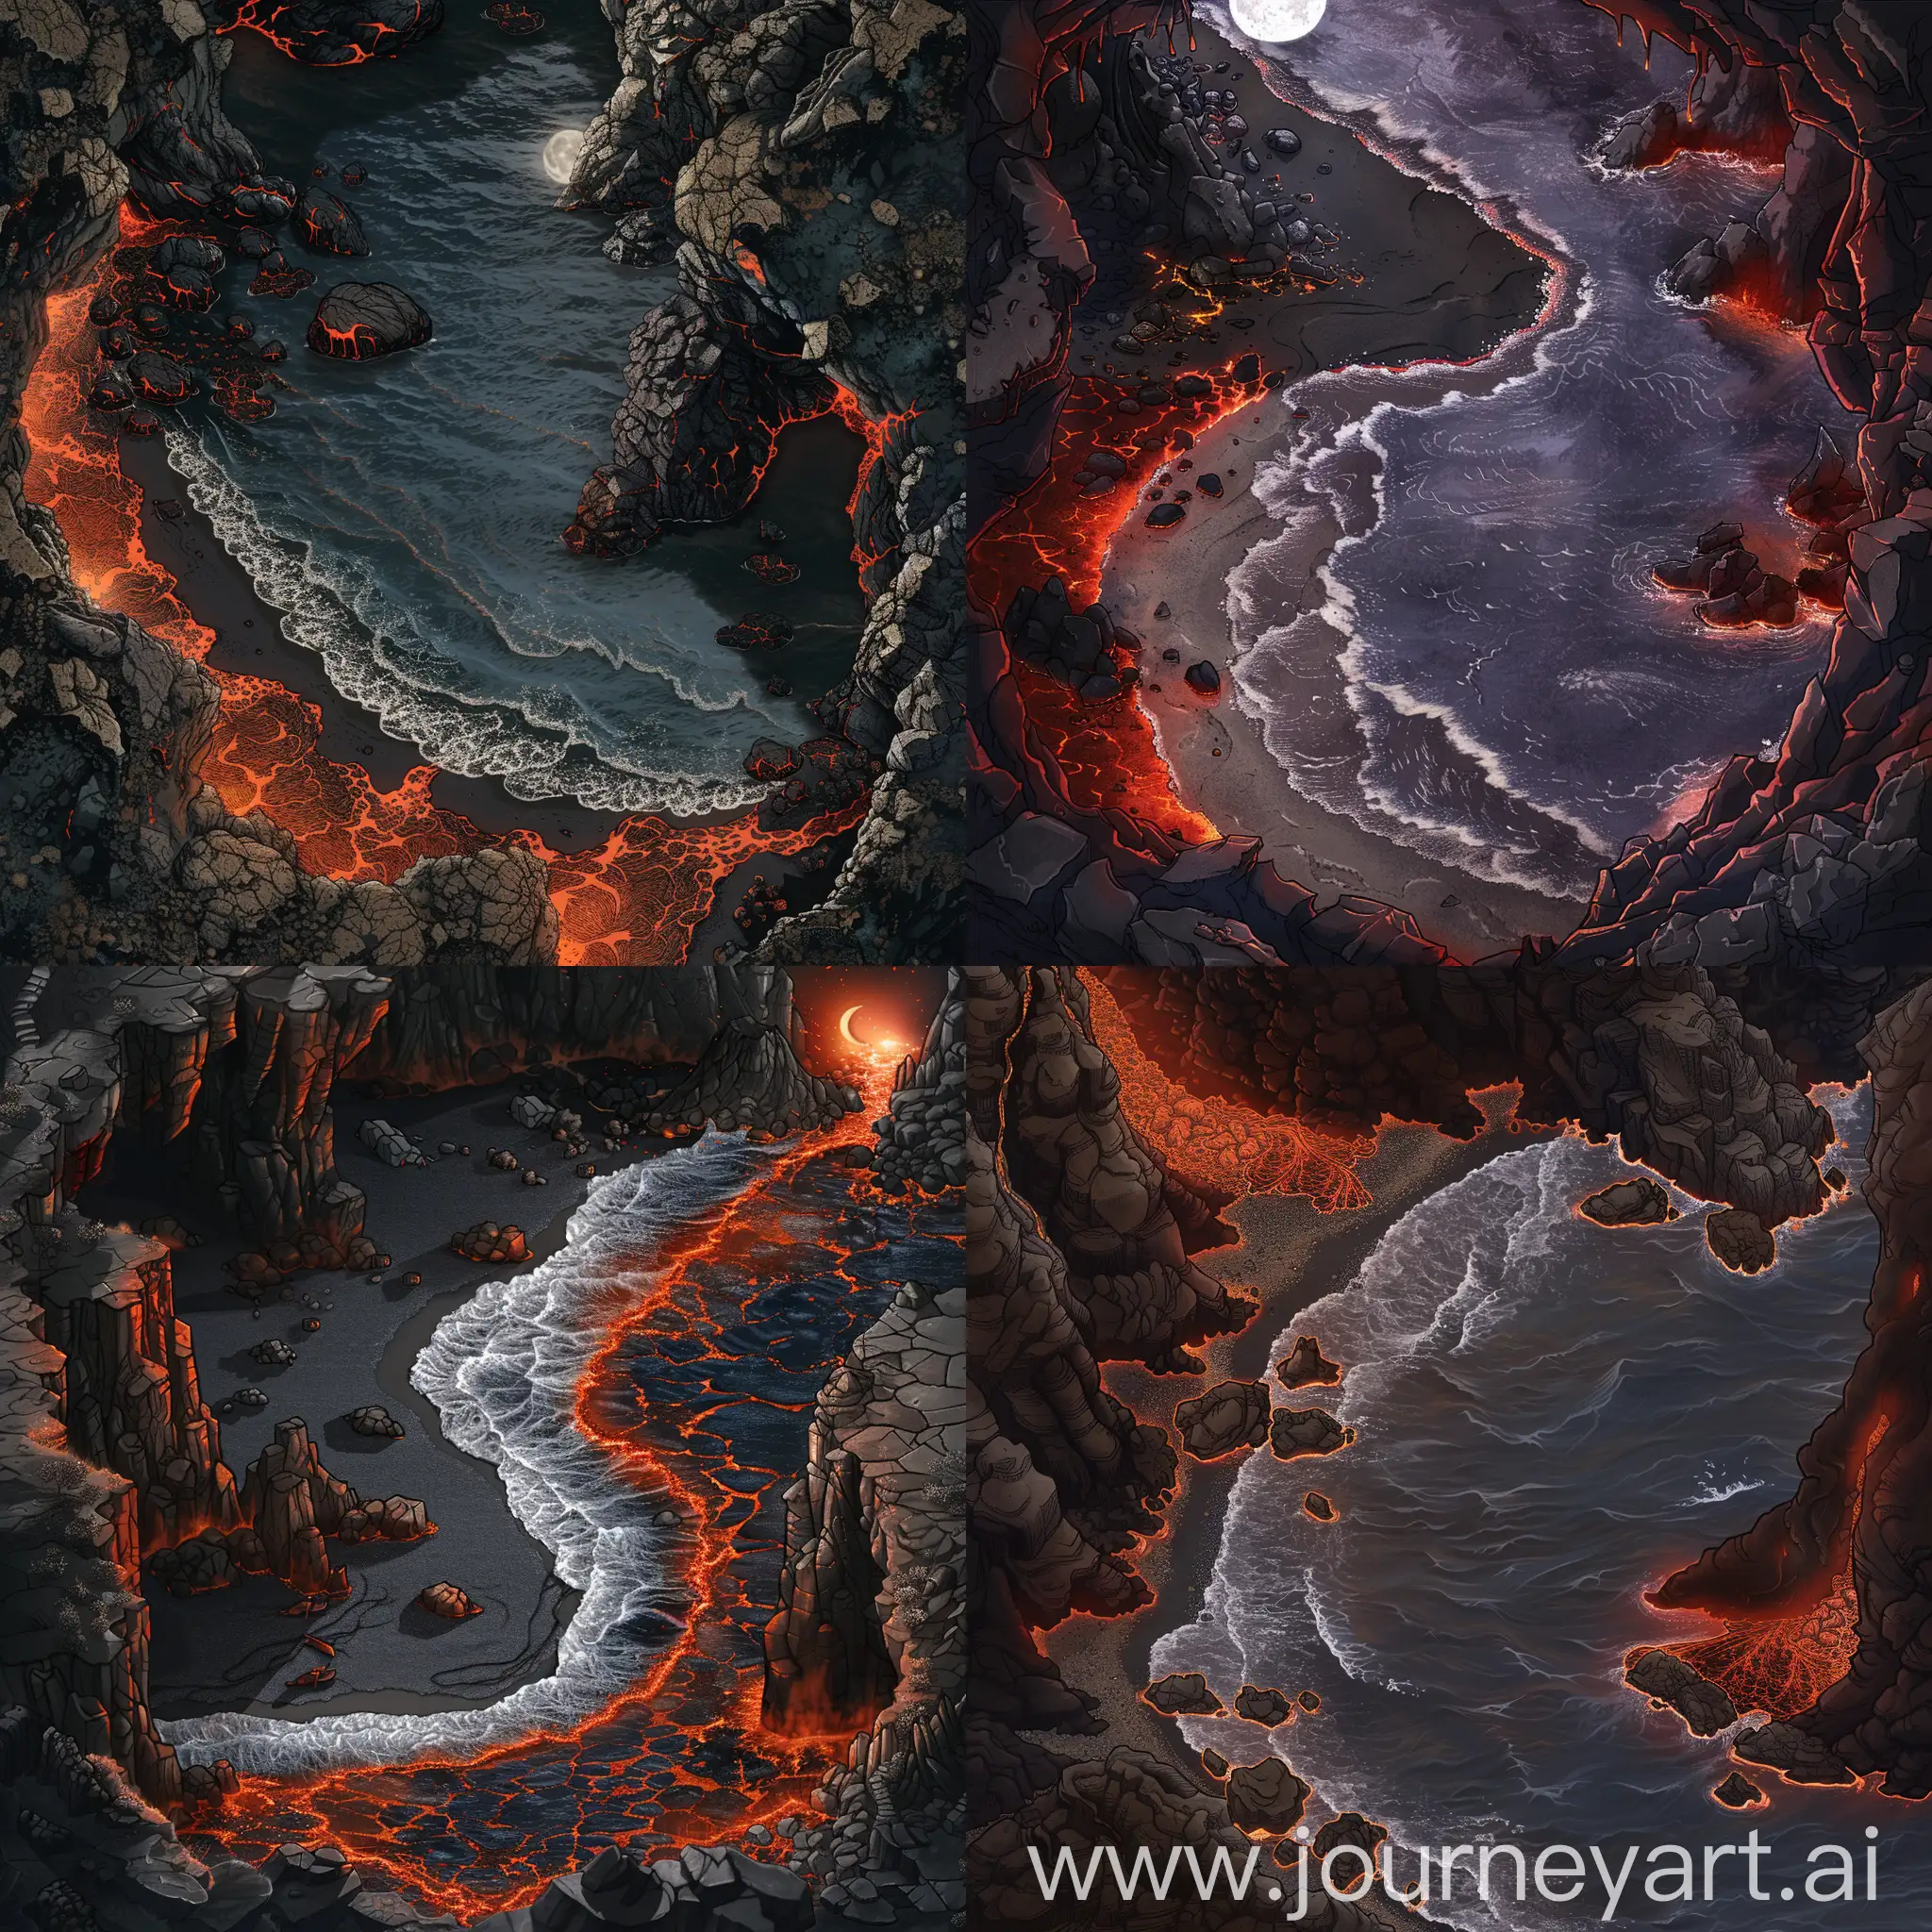 A captivating 2D top-centered bird's-eye view RPG battlemap of a black sand beach, nestled between molten rocks and a lava bay. The black sand glimmers under the moonlight, while lava waves crash against the shore. The red-hot lava bay provides a dramatic backdrop.